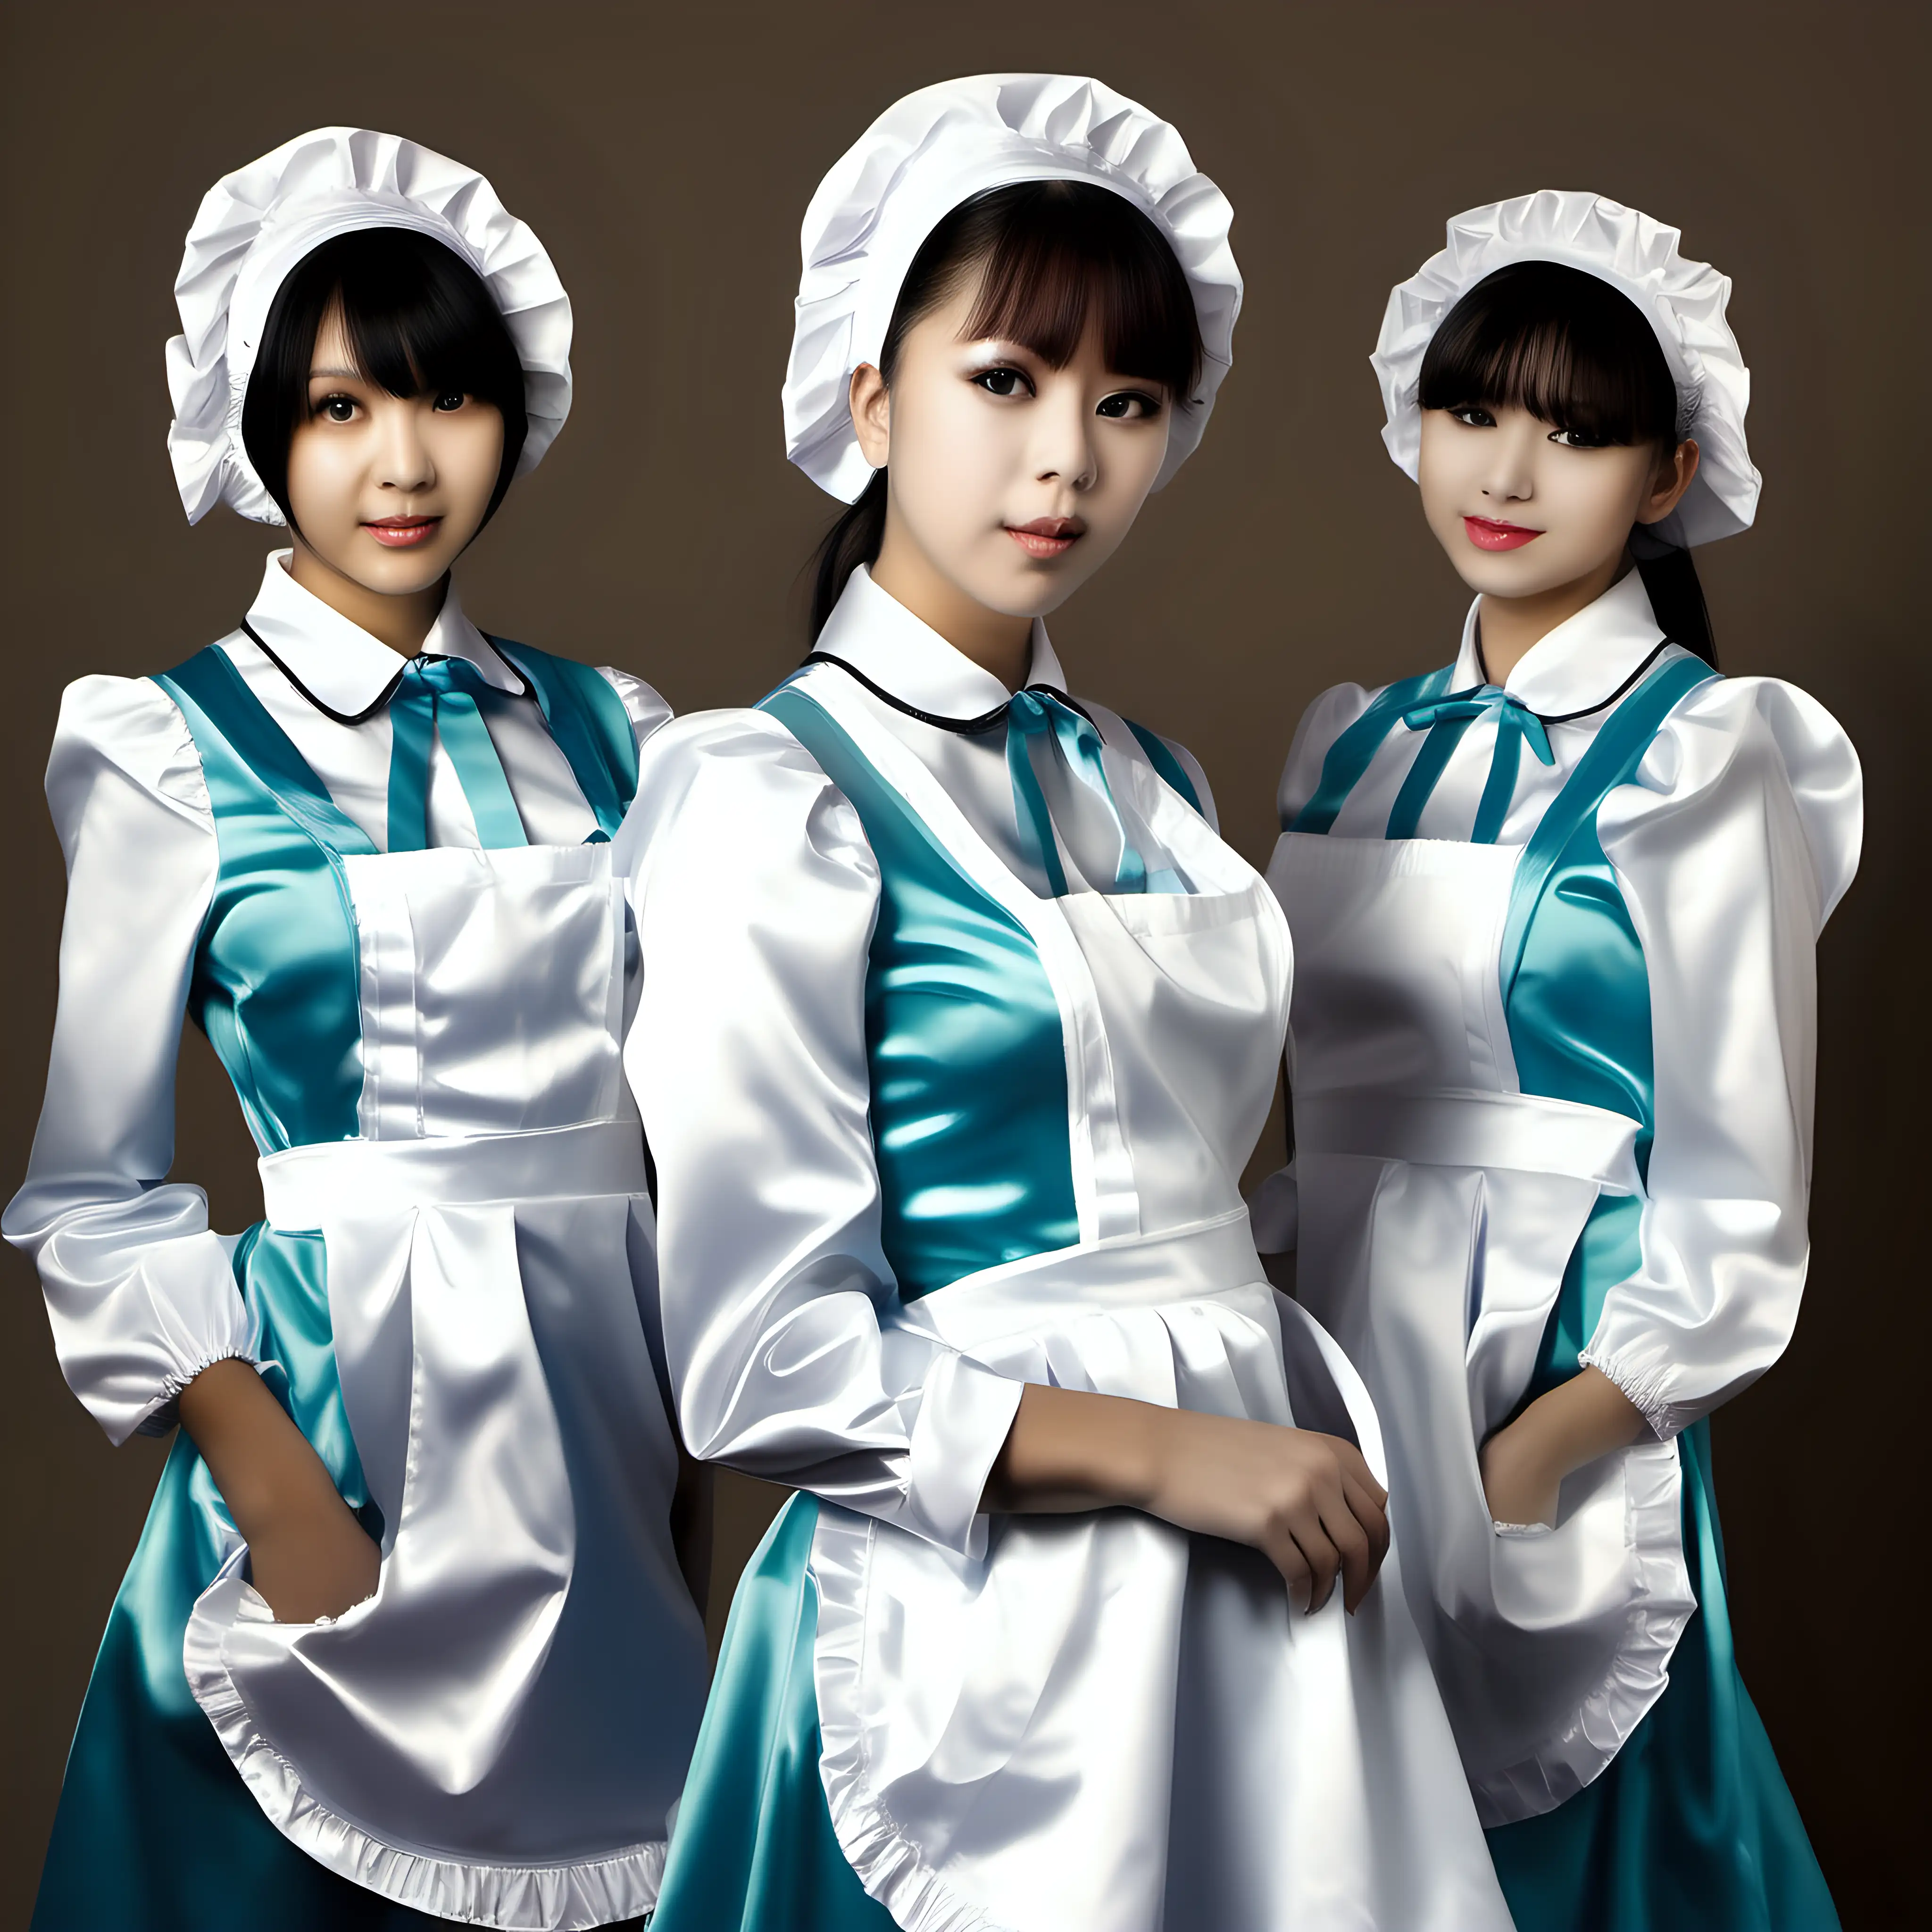 Elegant Girls in Satin Long Maid Uniforms Engage in Charming Activities